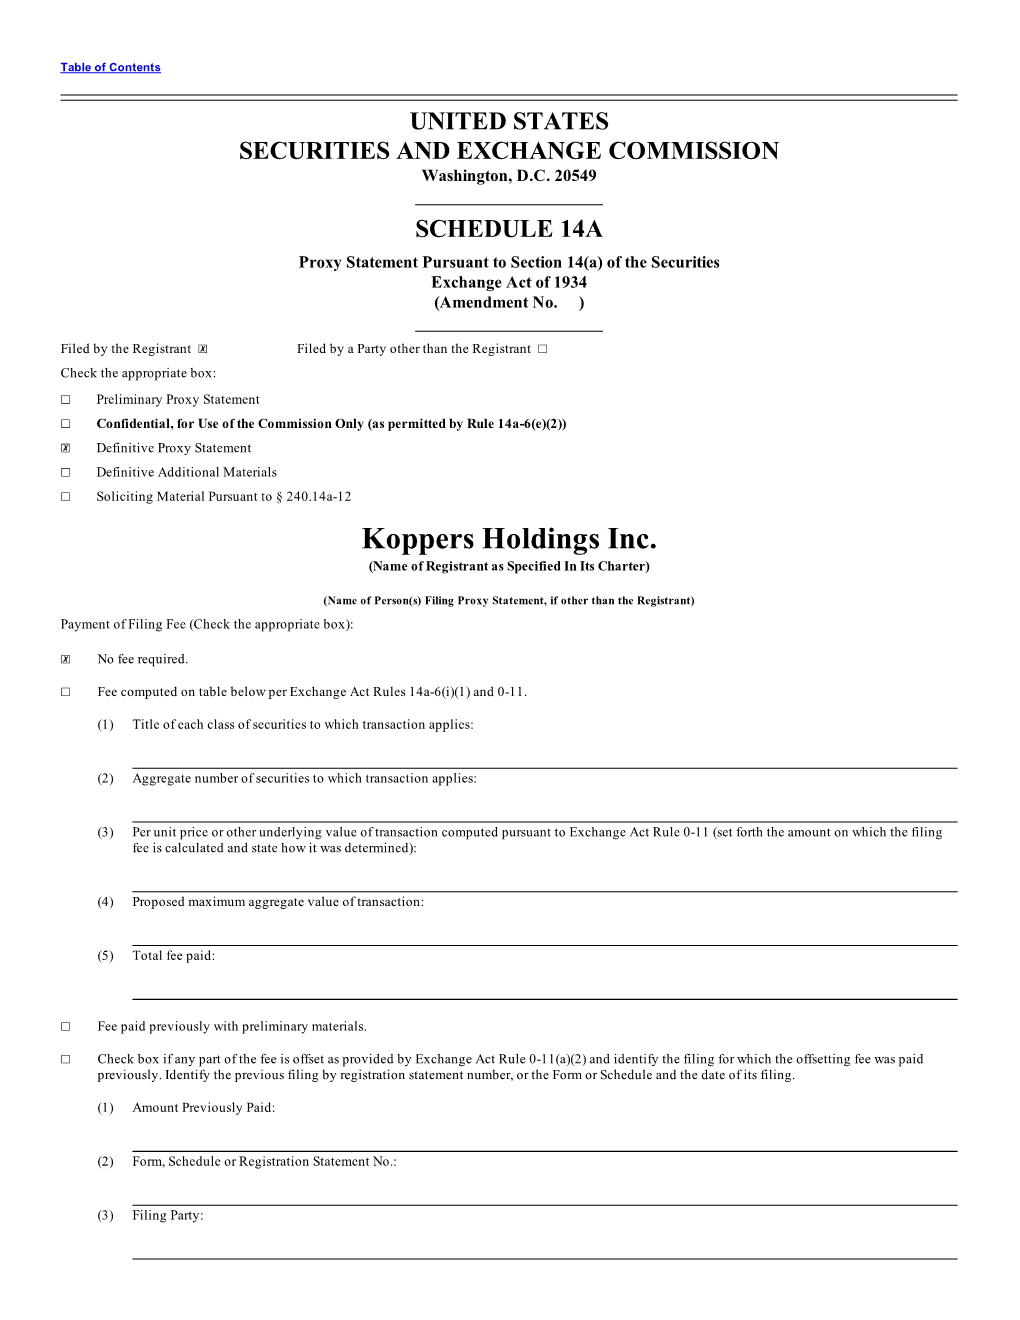 Koppers Holdings Inc. (Name of Registrant As Specified in Its Charter)